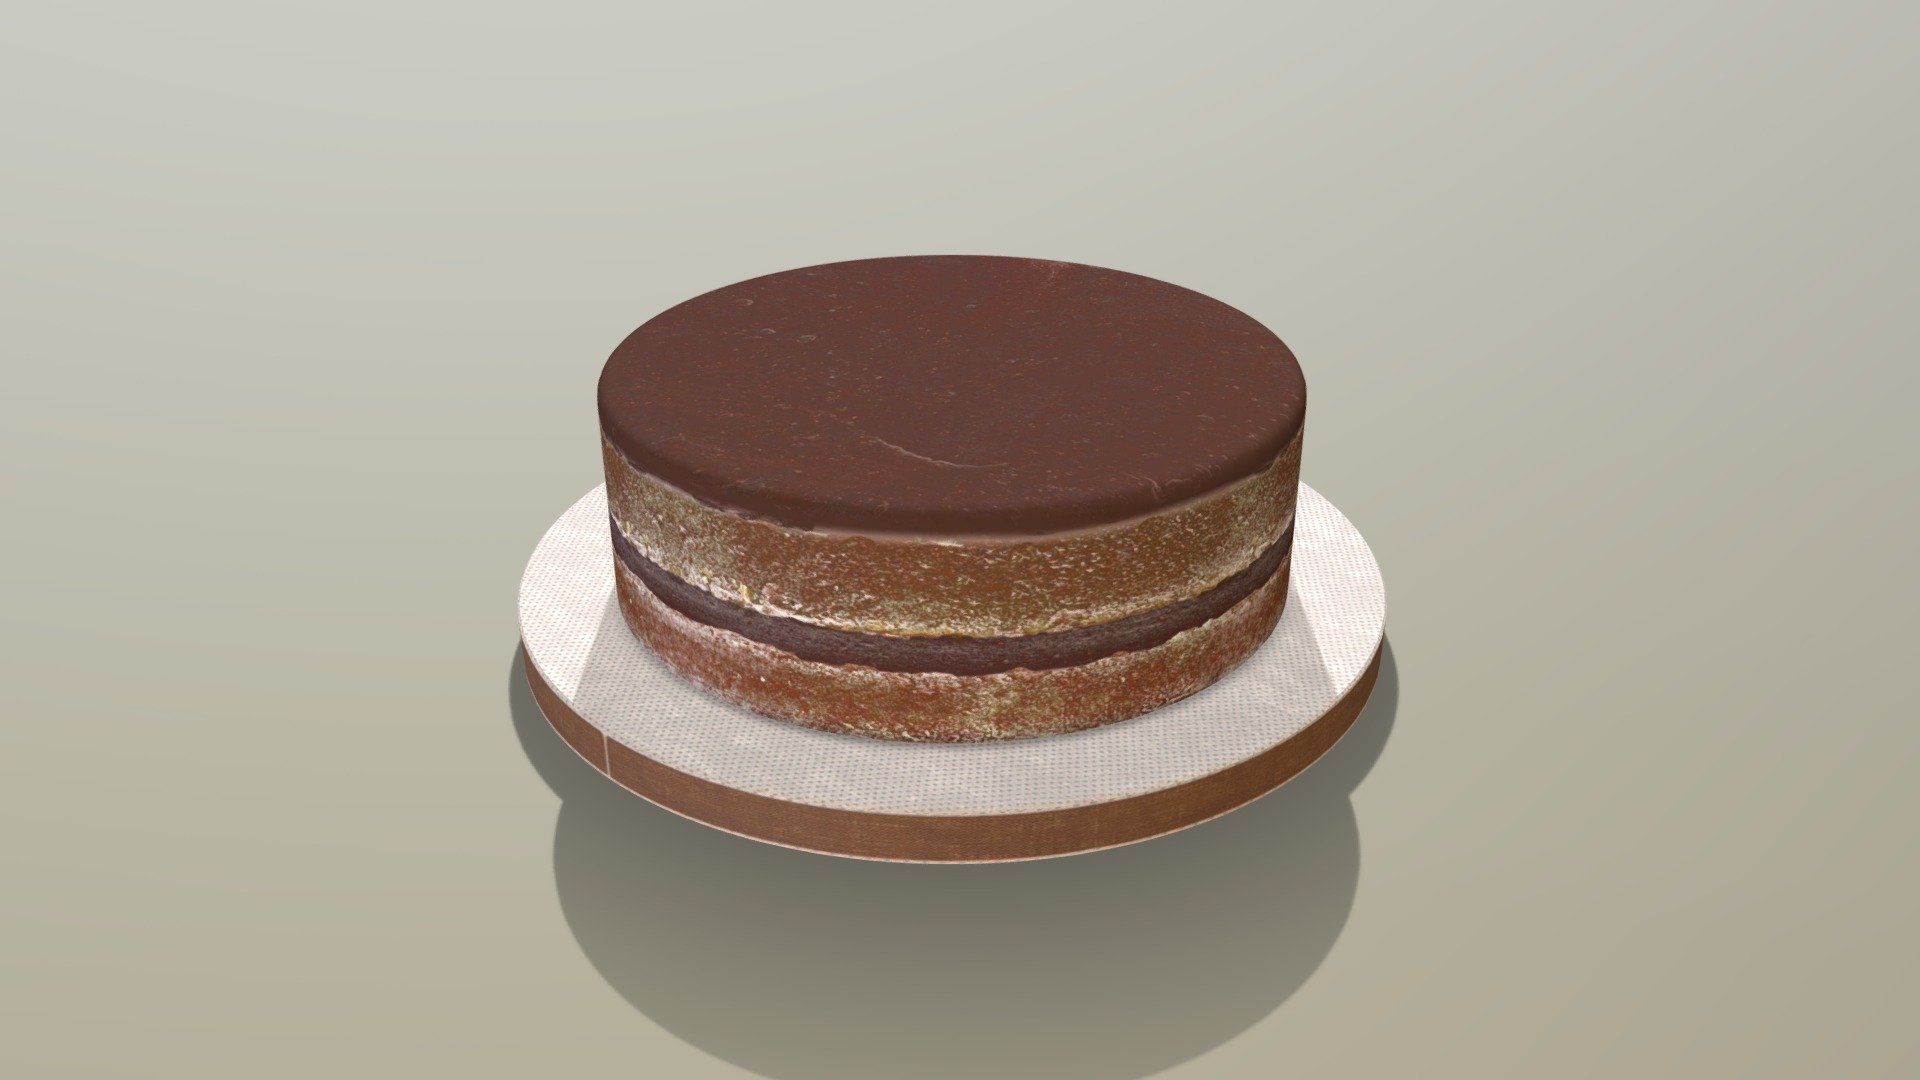 Showcase with cakes and desserts 3D model | CGTrader